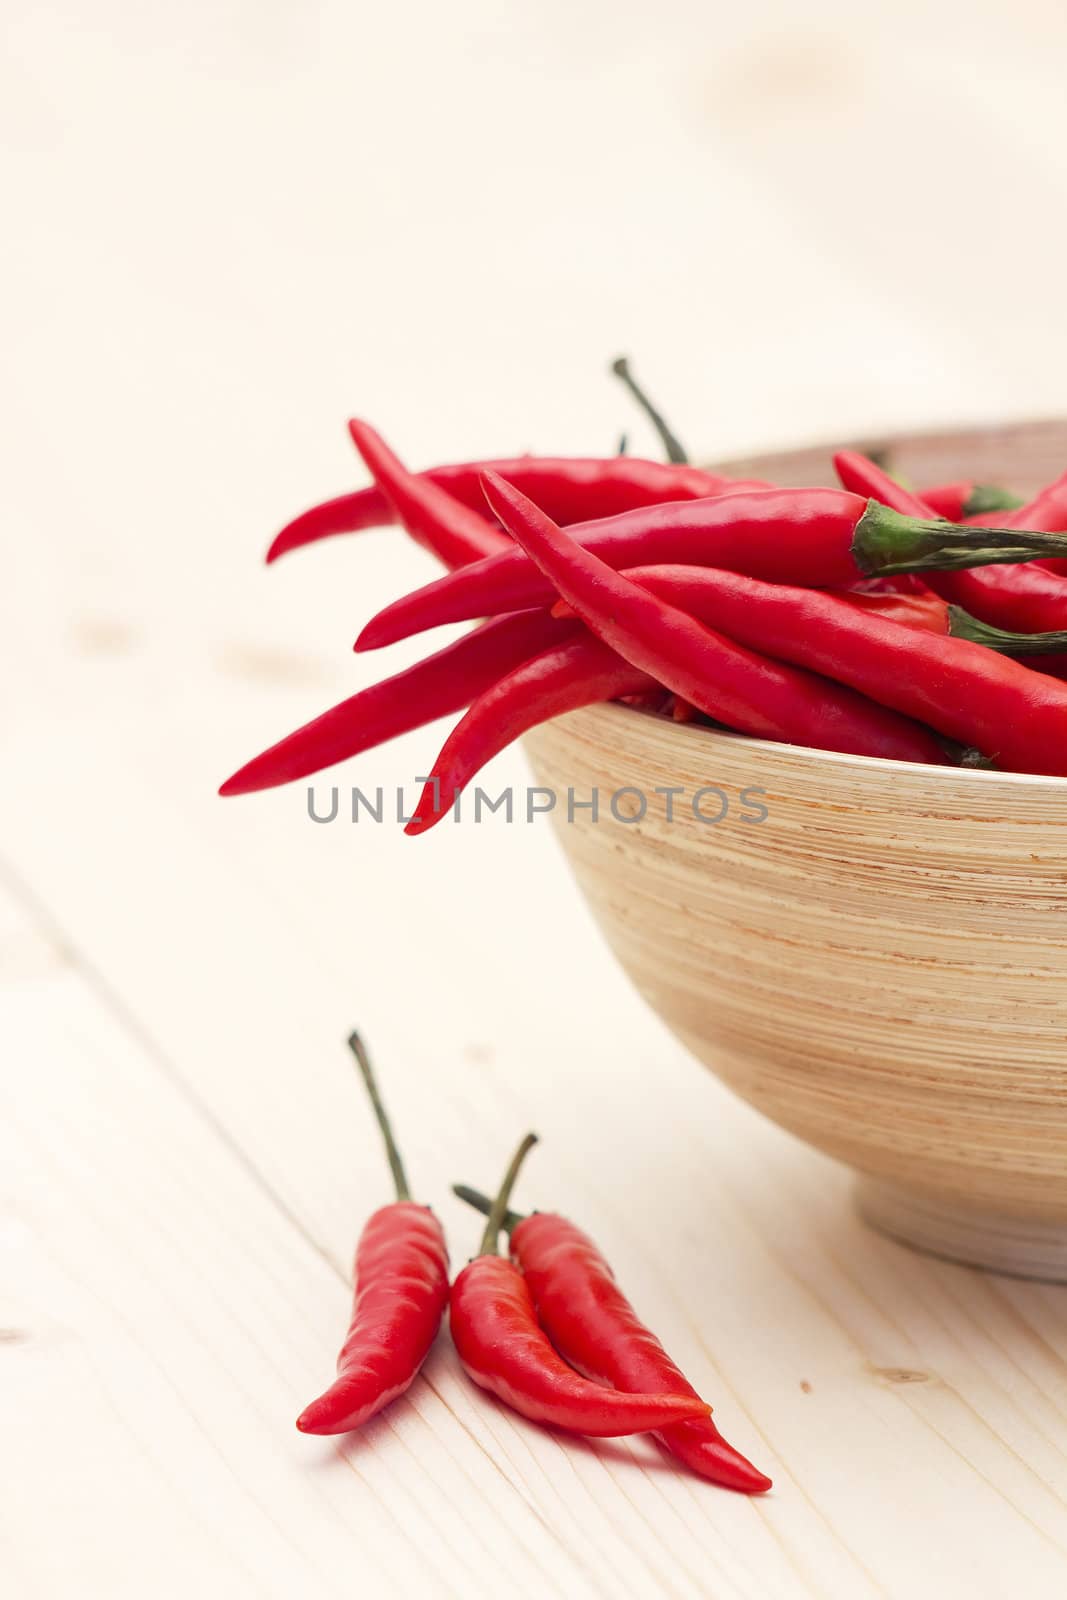 red chili peppers in a bowl